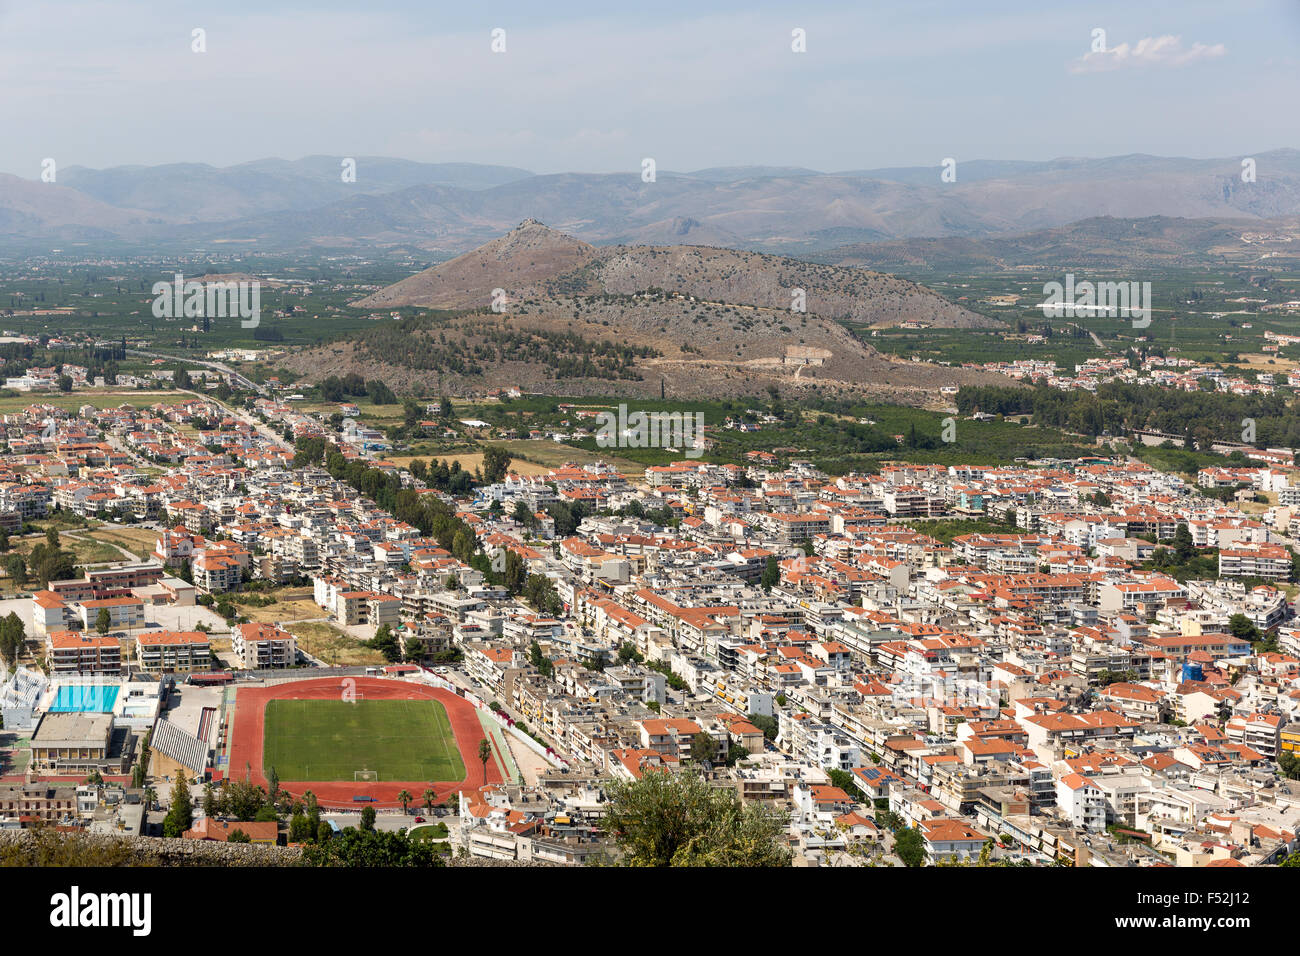 Aerial view of Nafplio, Greece showing a sports complex with soccer field Stock Photo